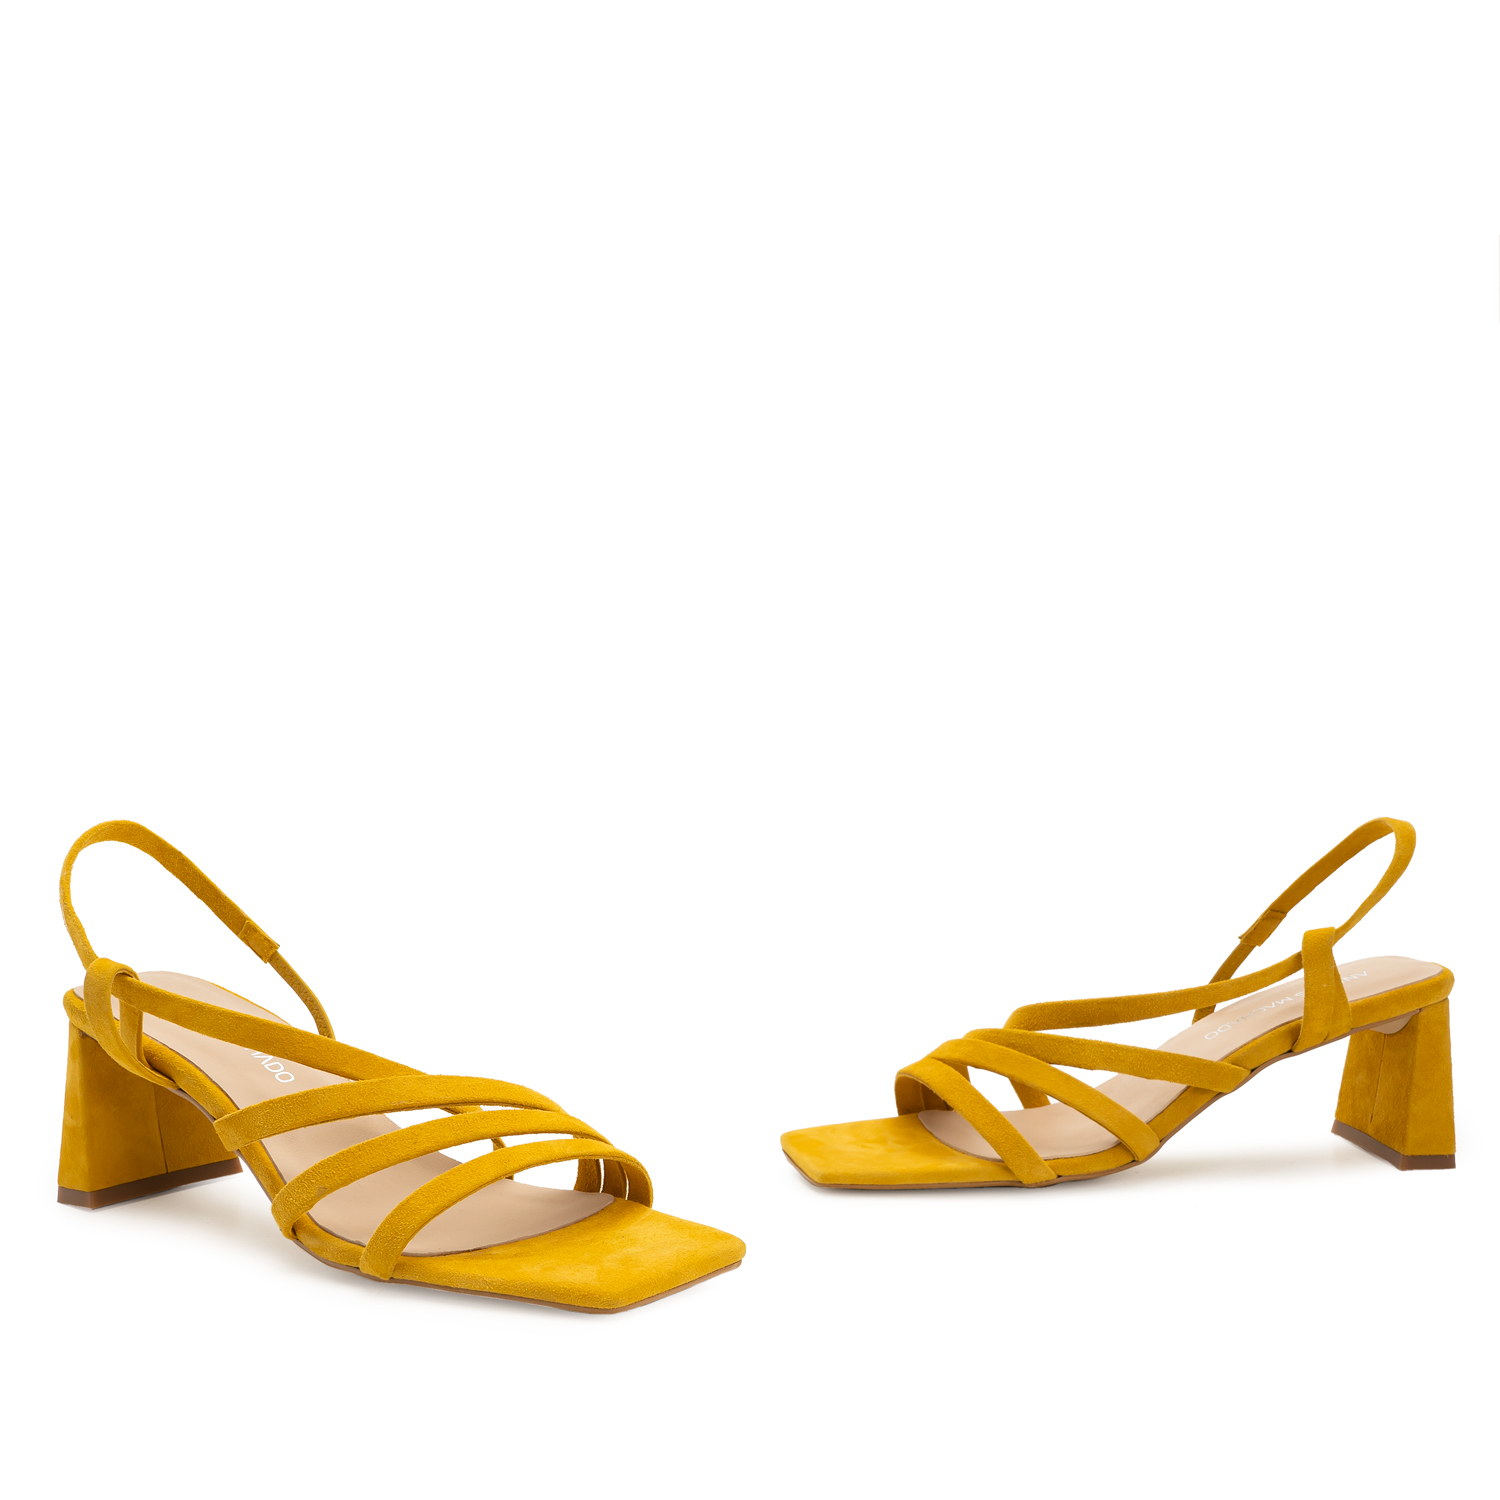 Strapped Sandals in Mustard Split Leather and Square Toe 